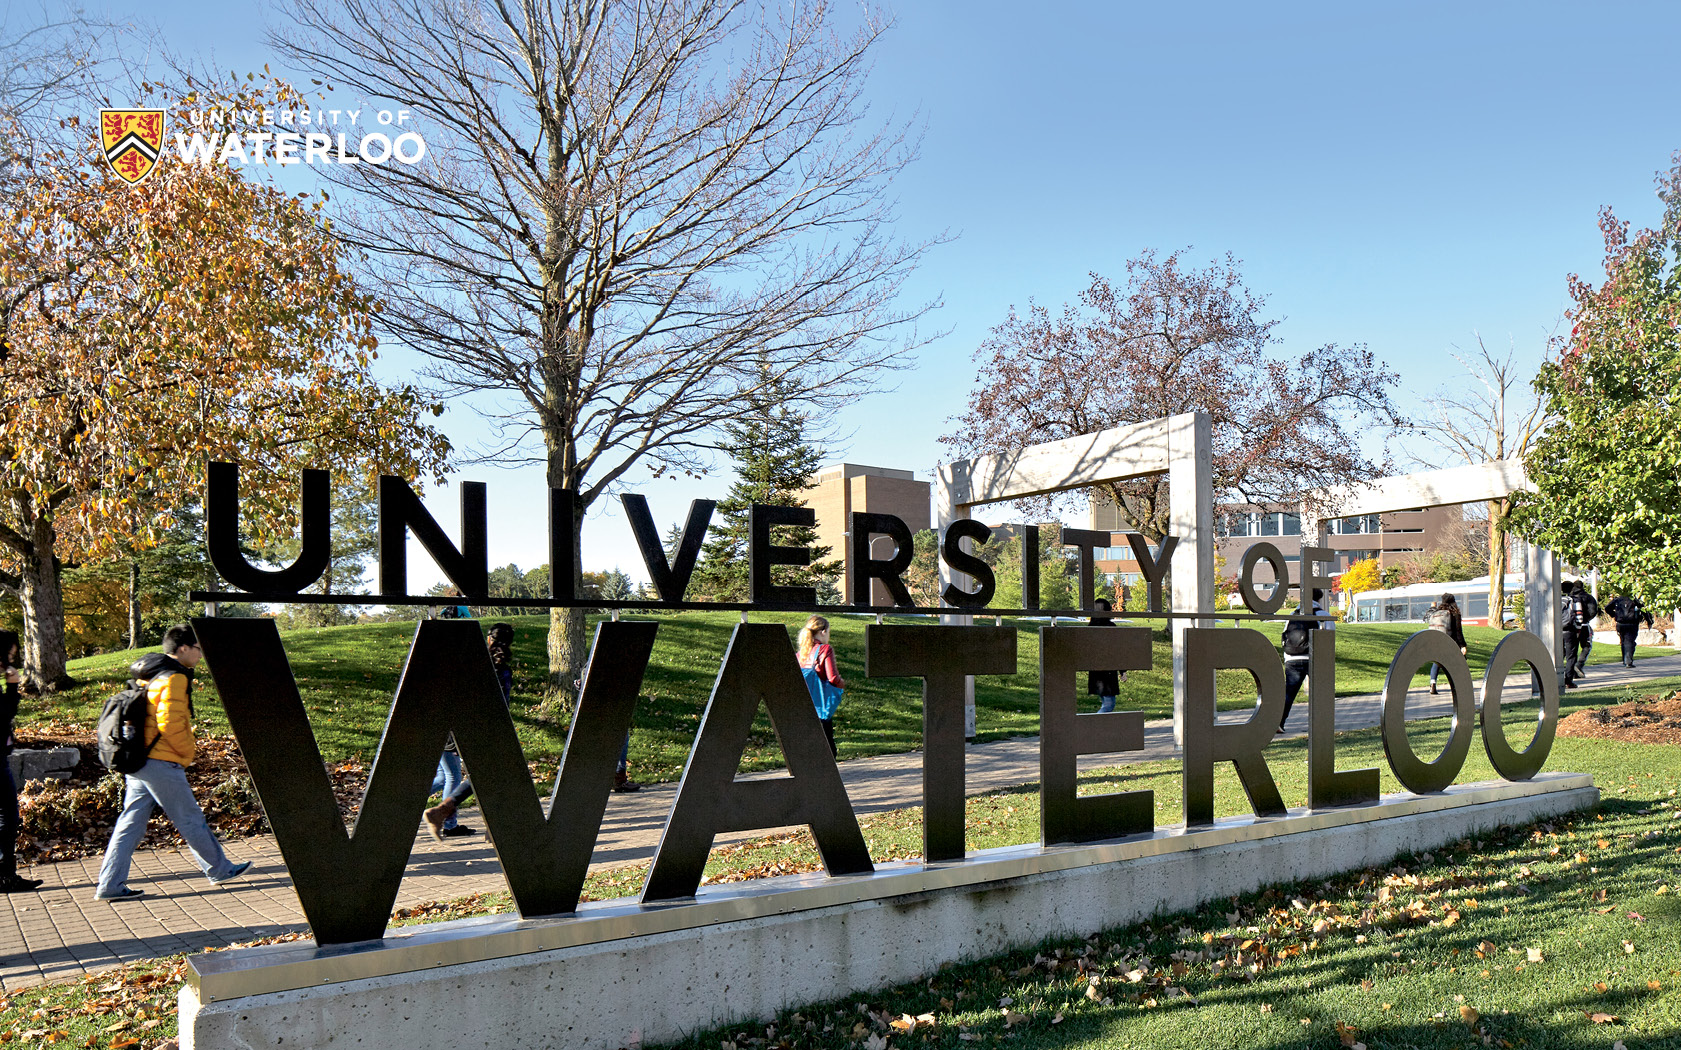 Save Time and Money at Illustrious University of Waterloo